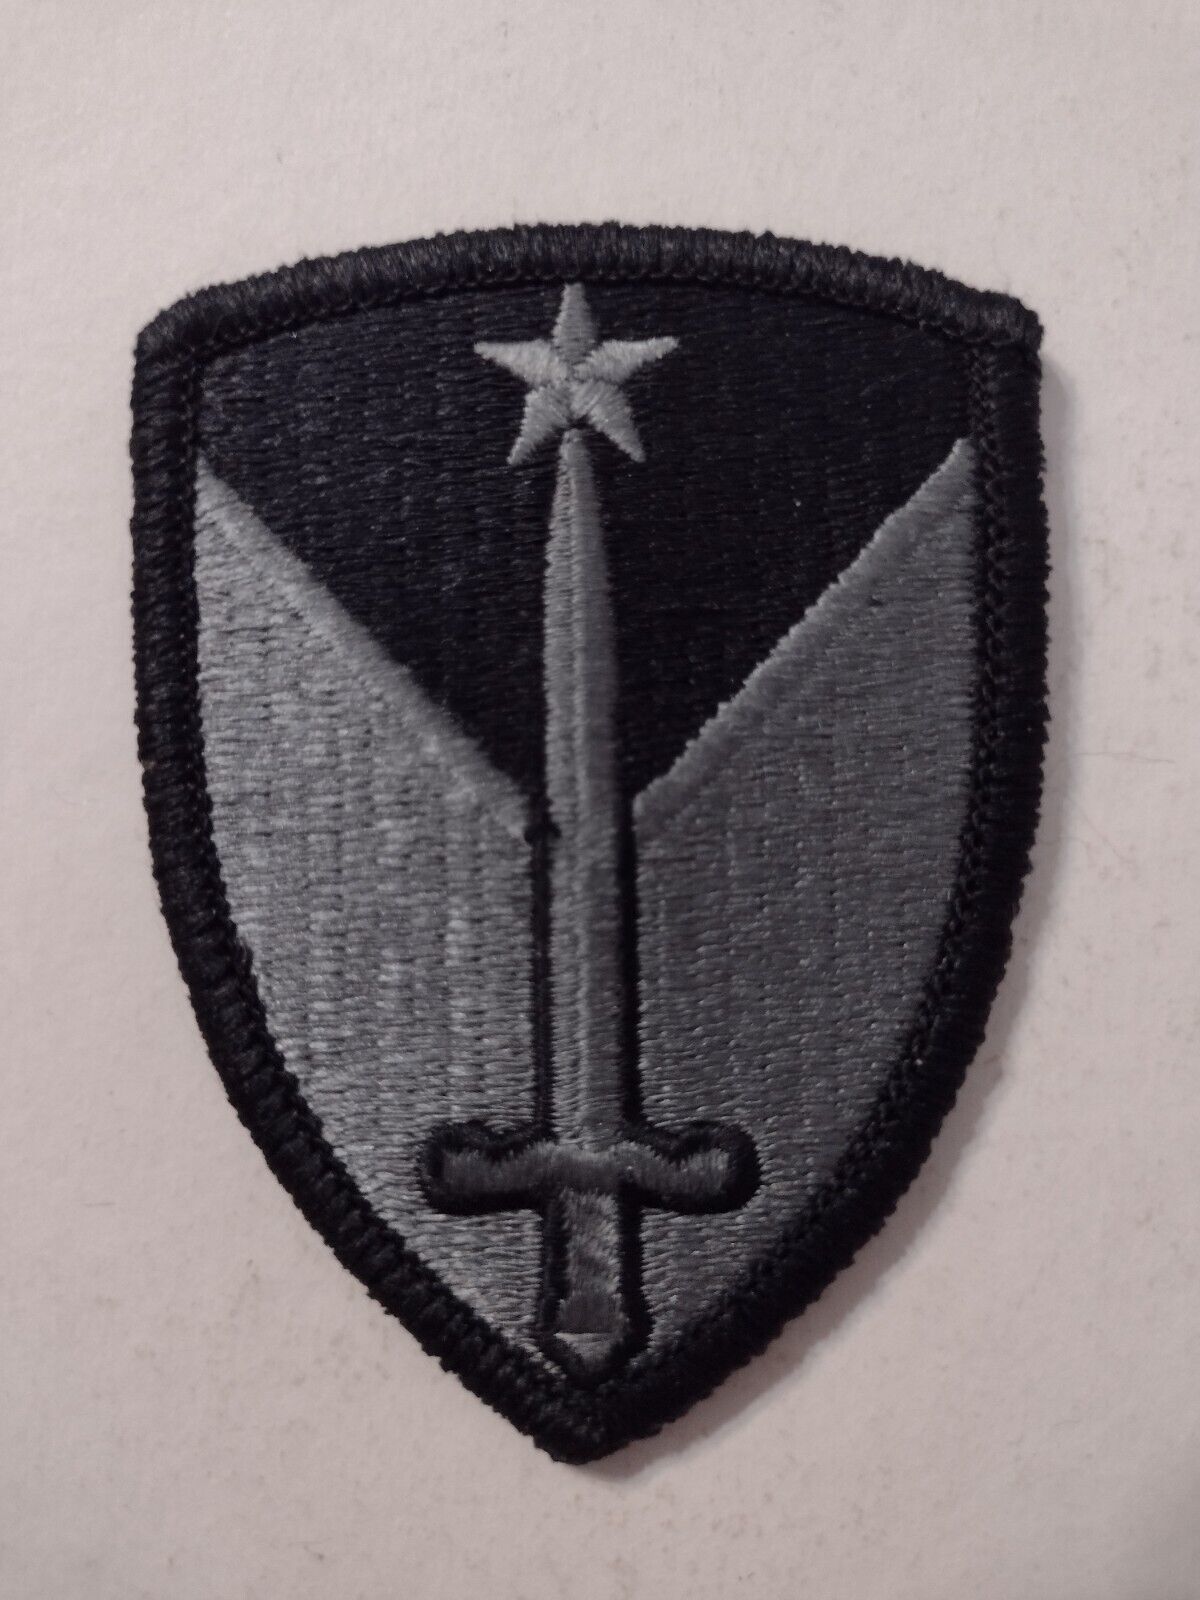 Primary image for ACU PATCH - 407th SUPPORT BRIGADE HAS HOOK & LOOP NEW :KY24-9